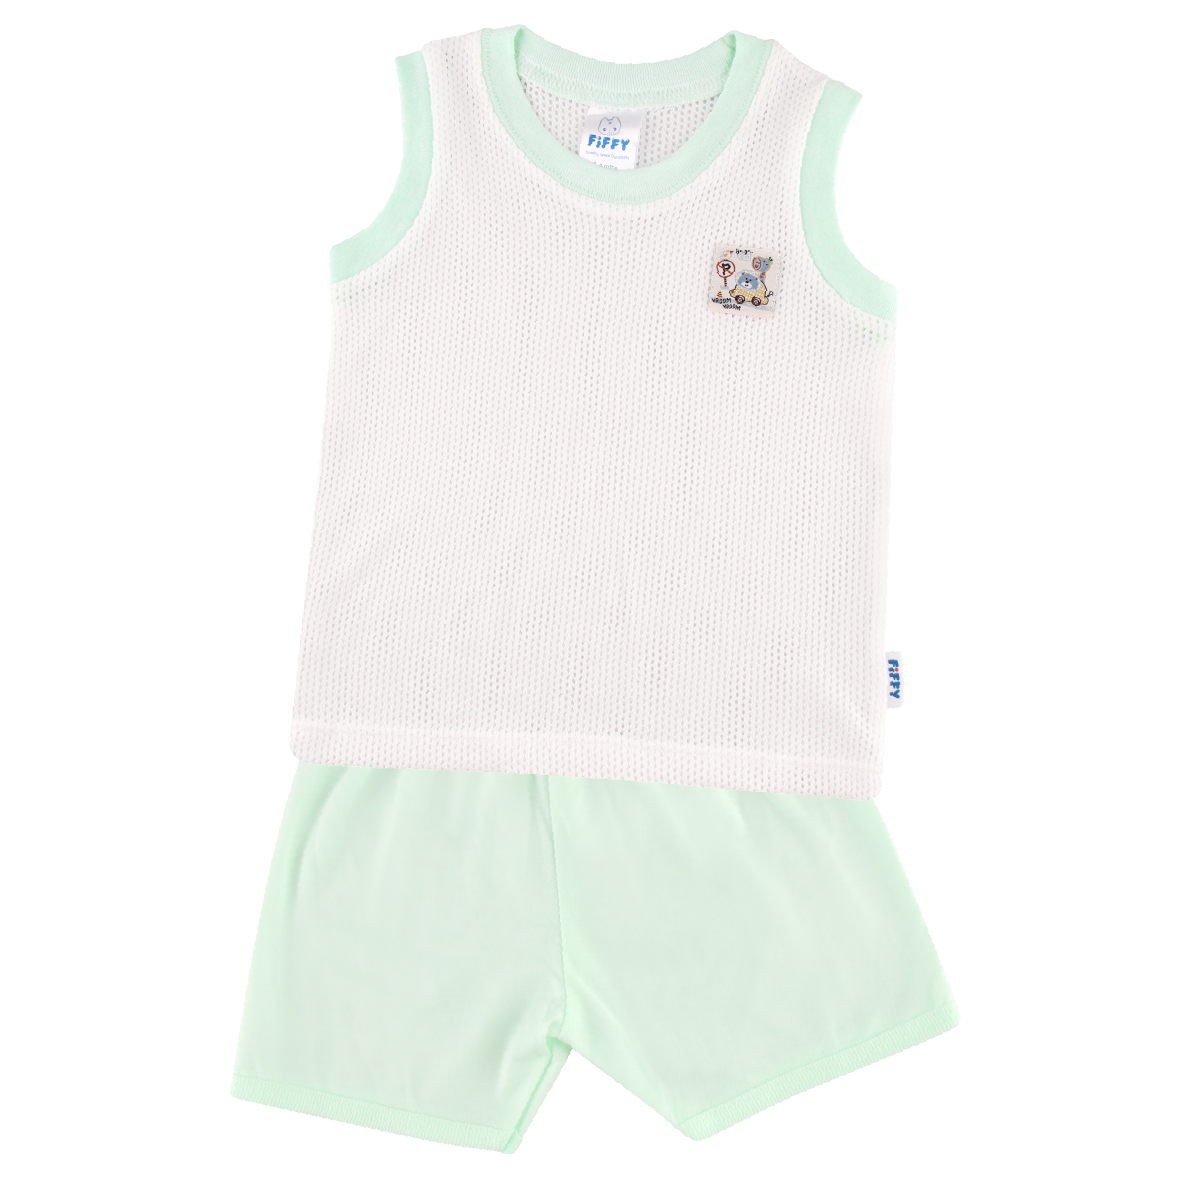 FIFFY COMELY ANIMALS TANK TOP SUIT